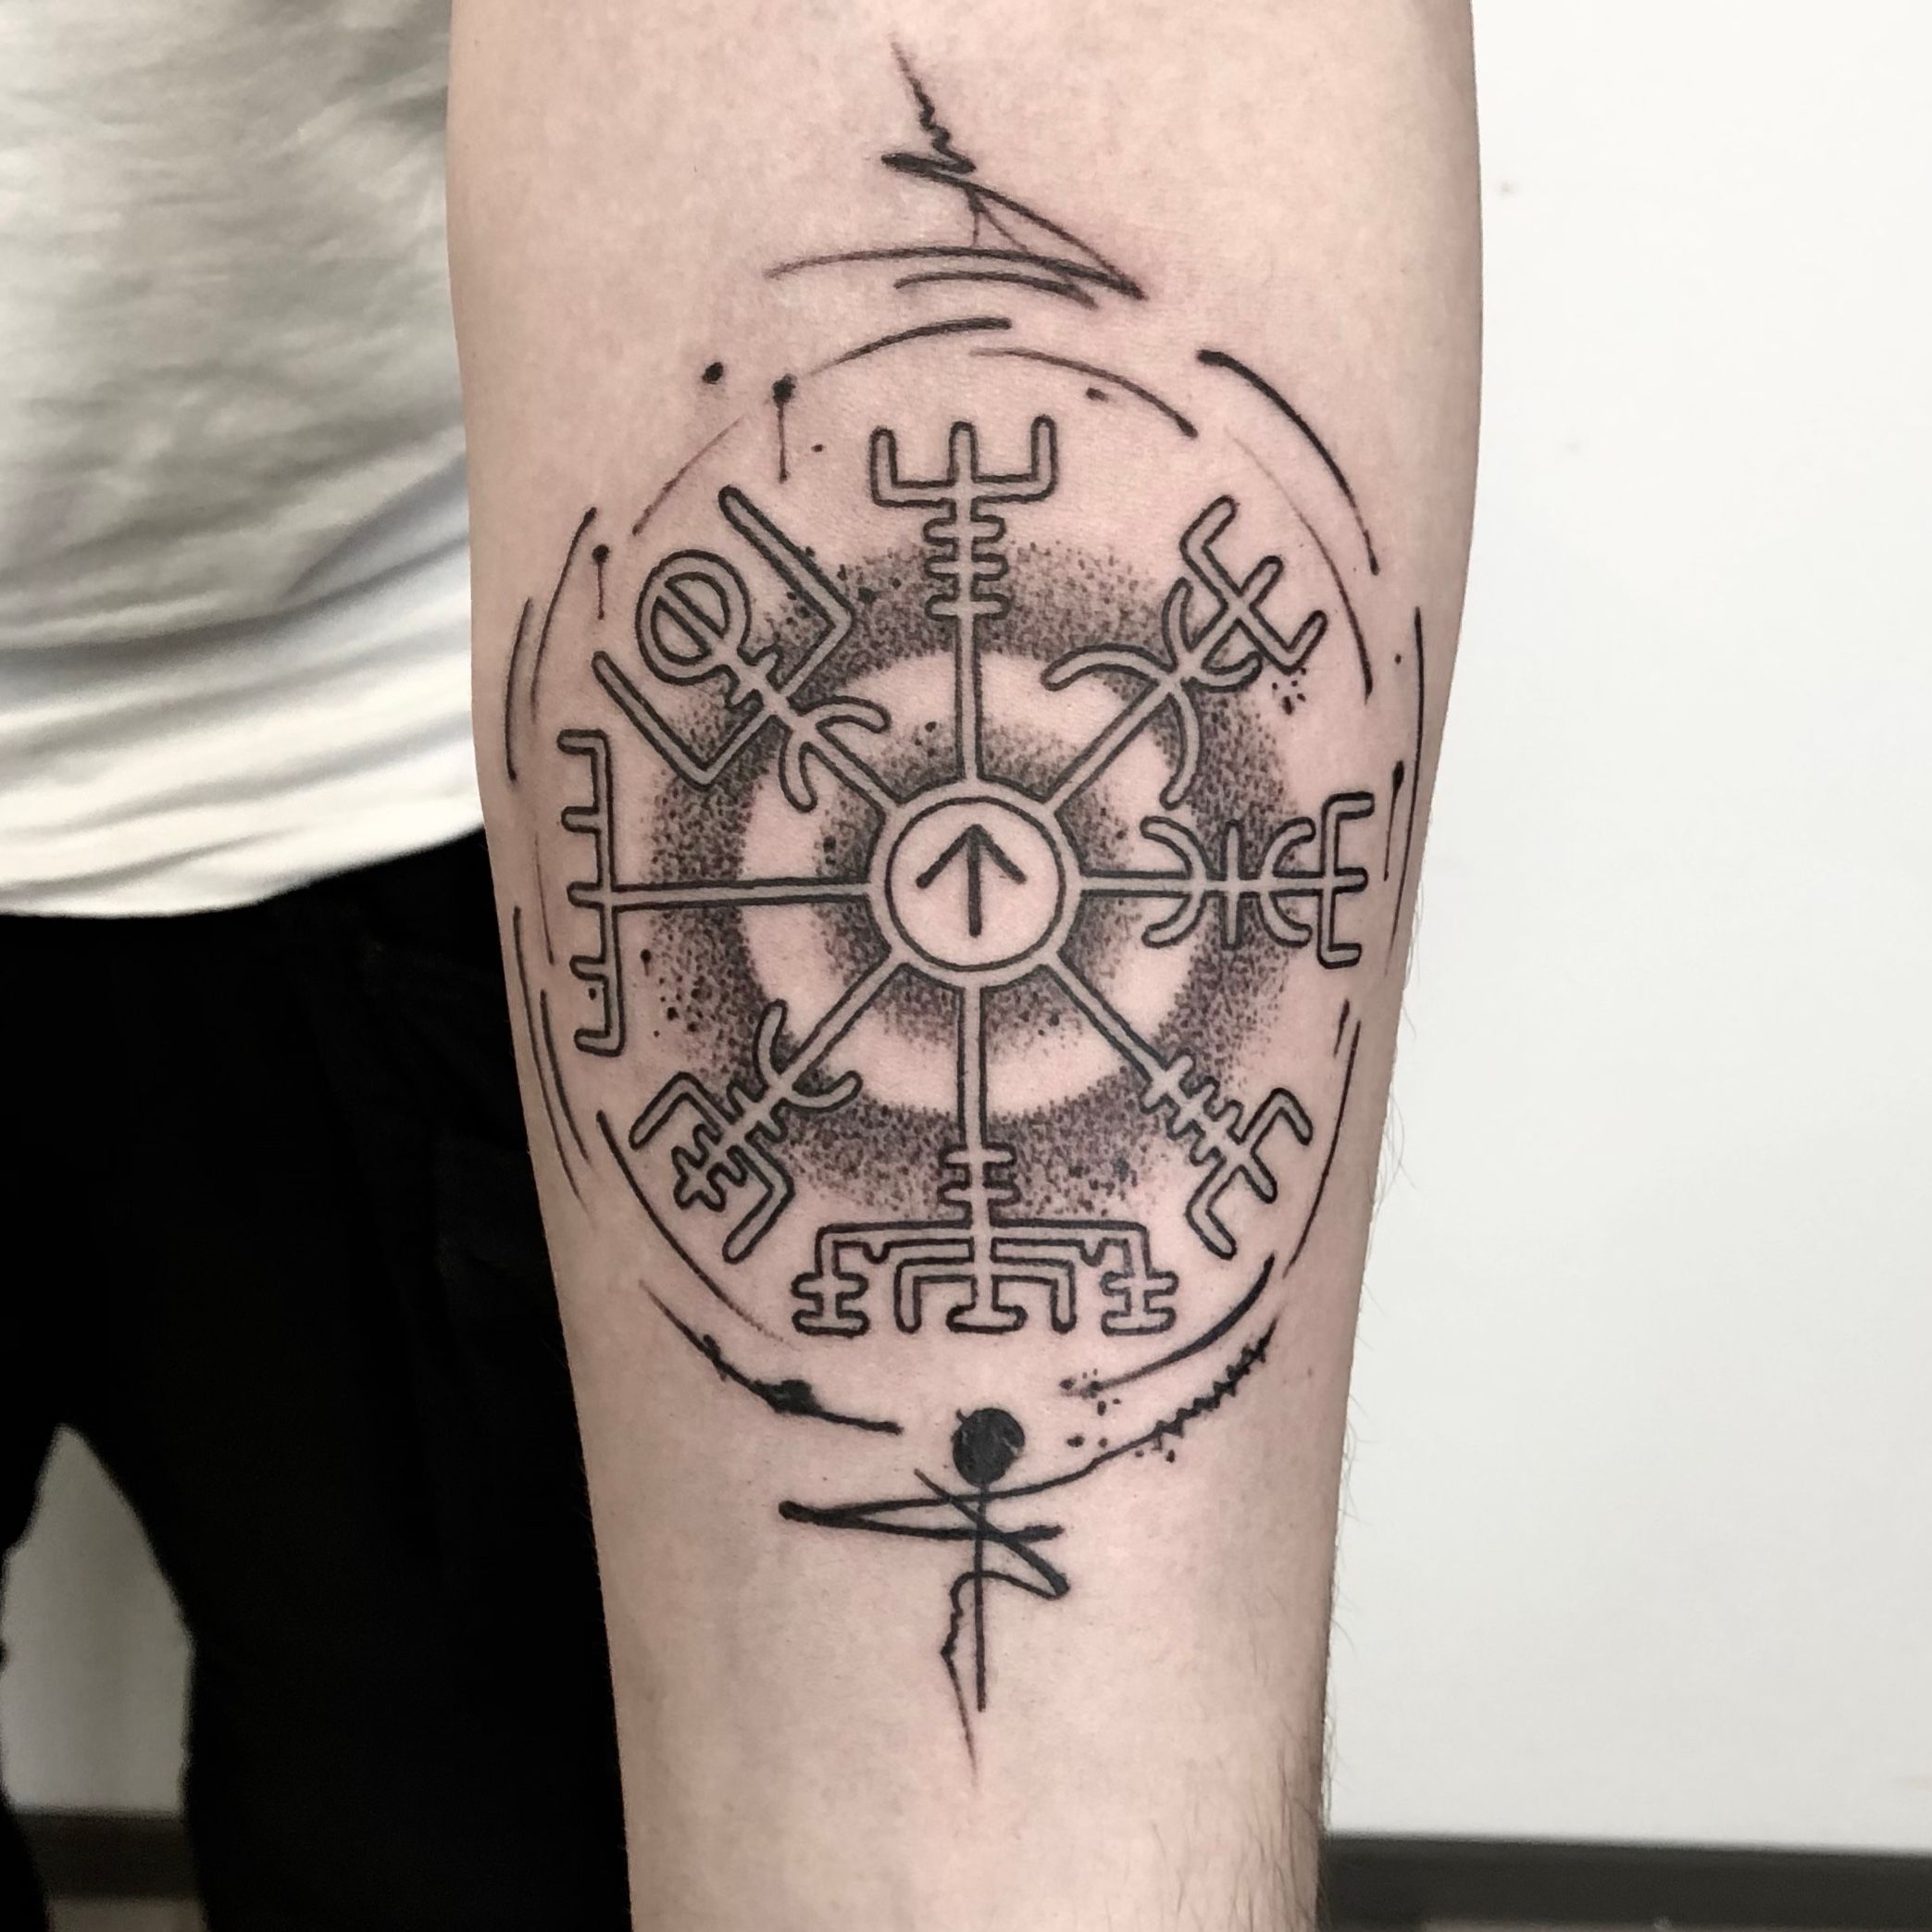 Compass tattoo on the upper arm